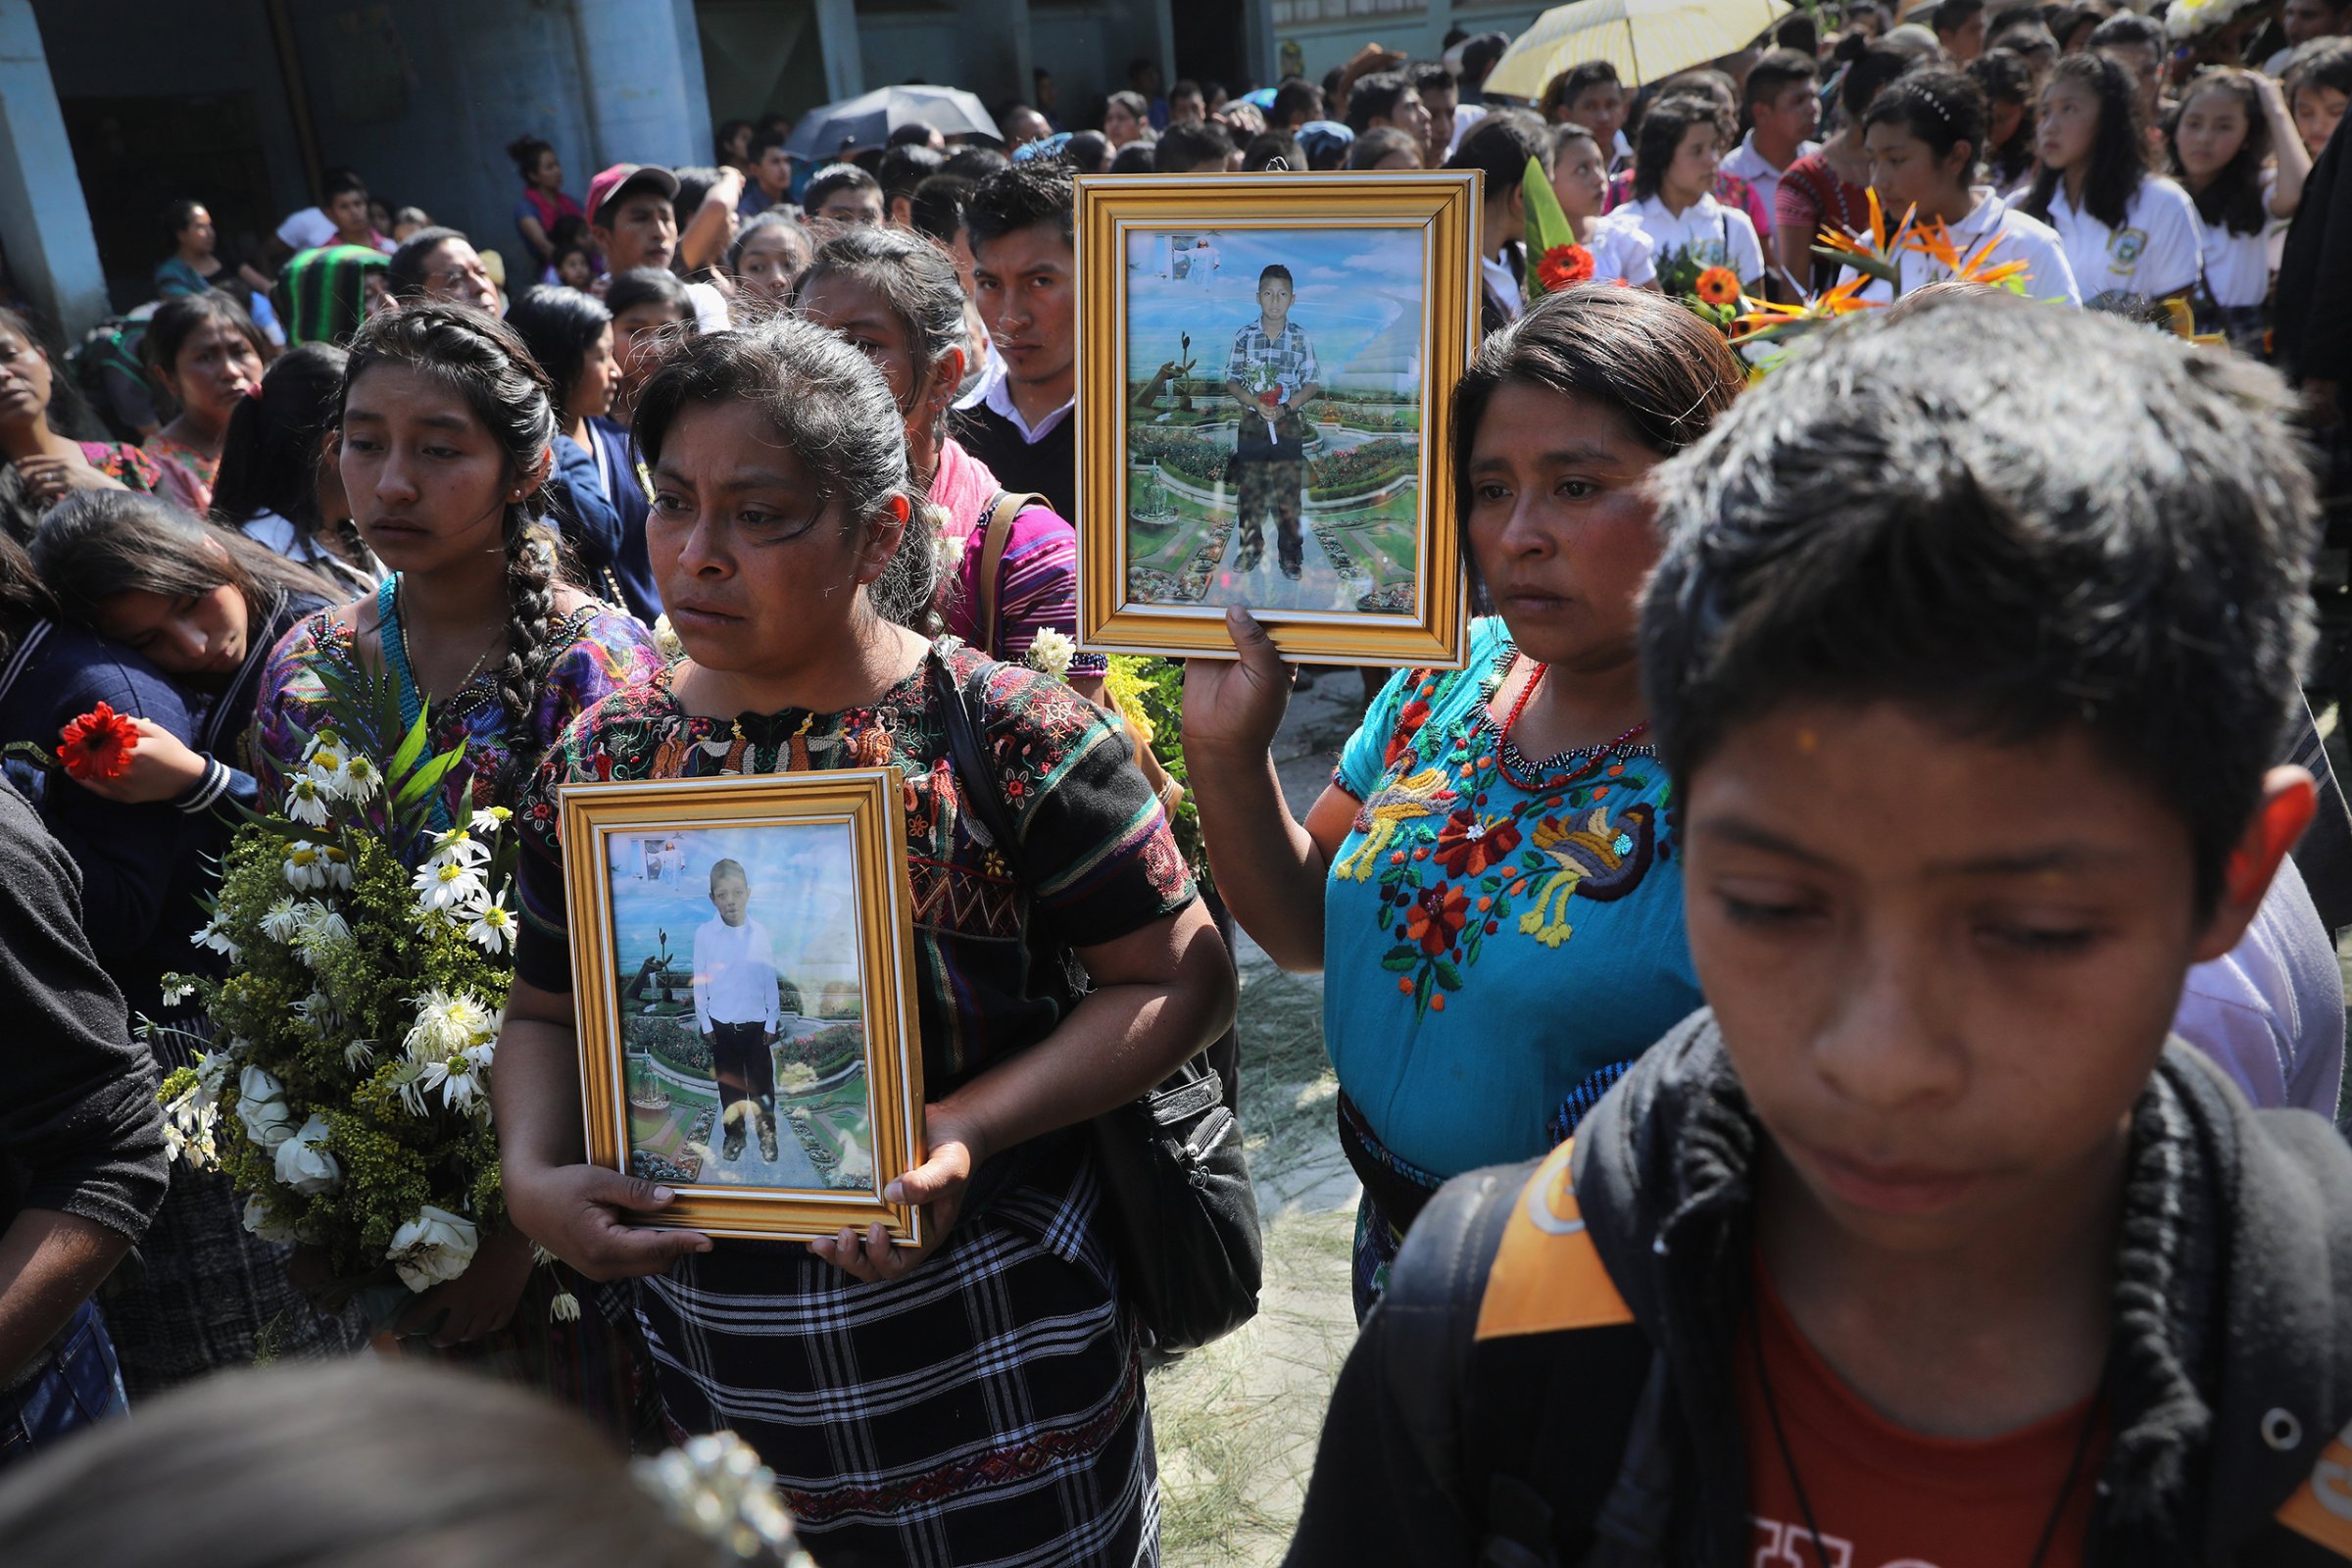 Mothers carry portraits of their sons who were kidnapped and killed in San Juan Sacatepéquez, Guatemala on Feb. 14, 2017.